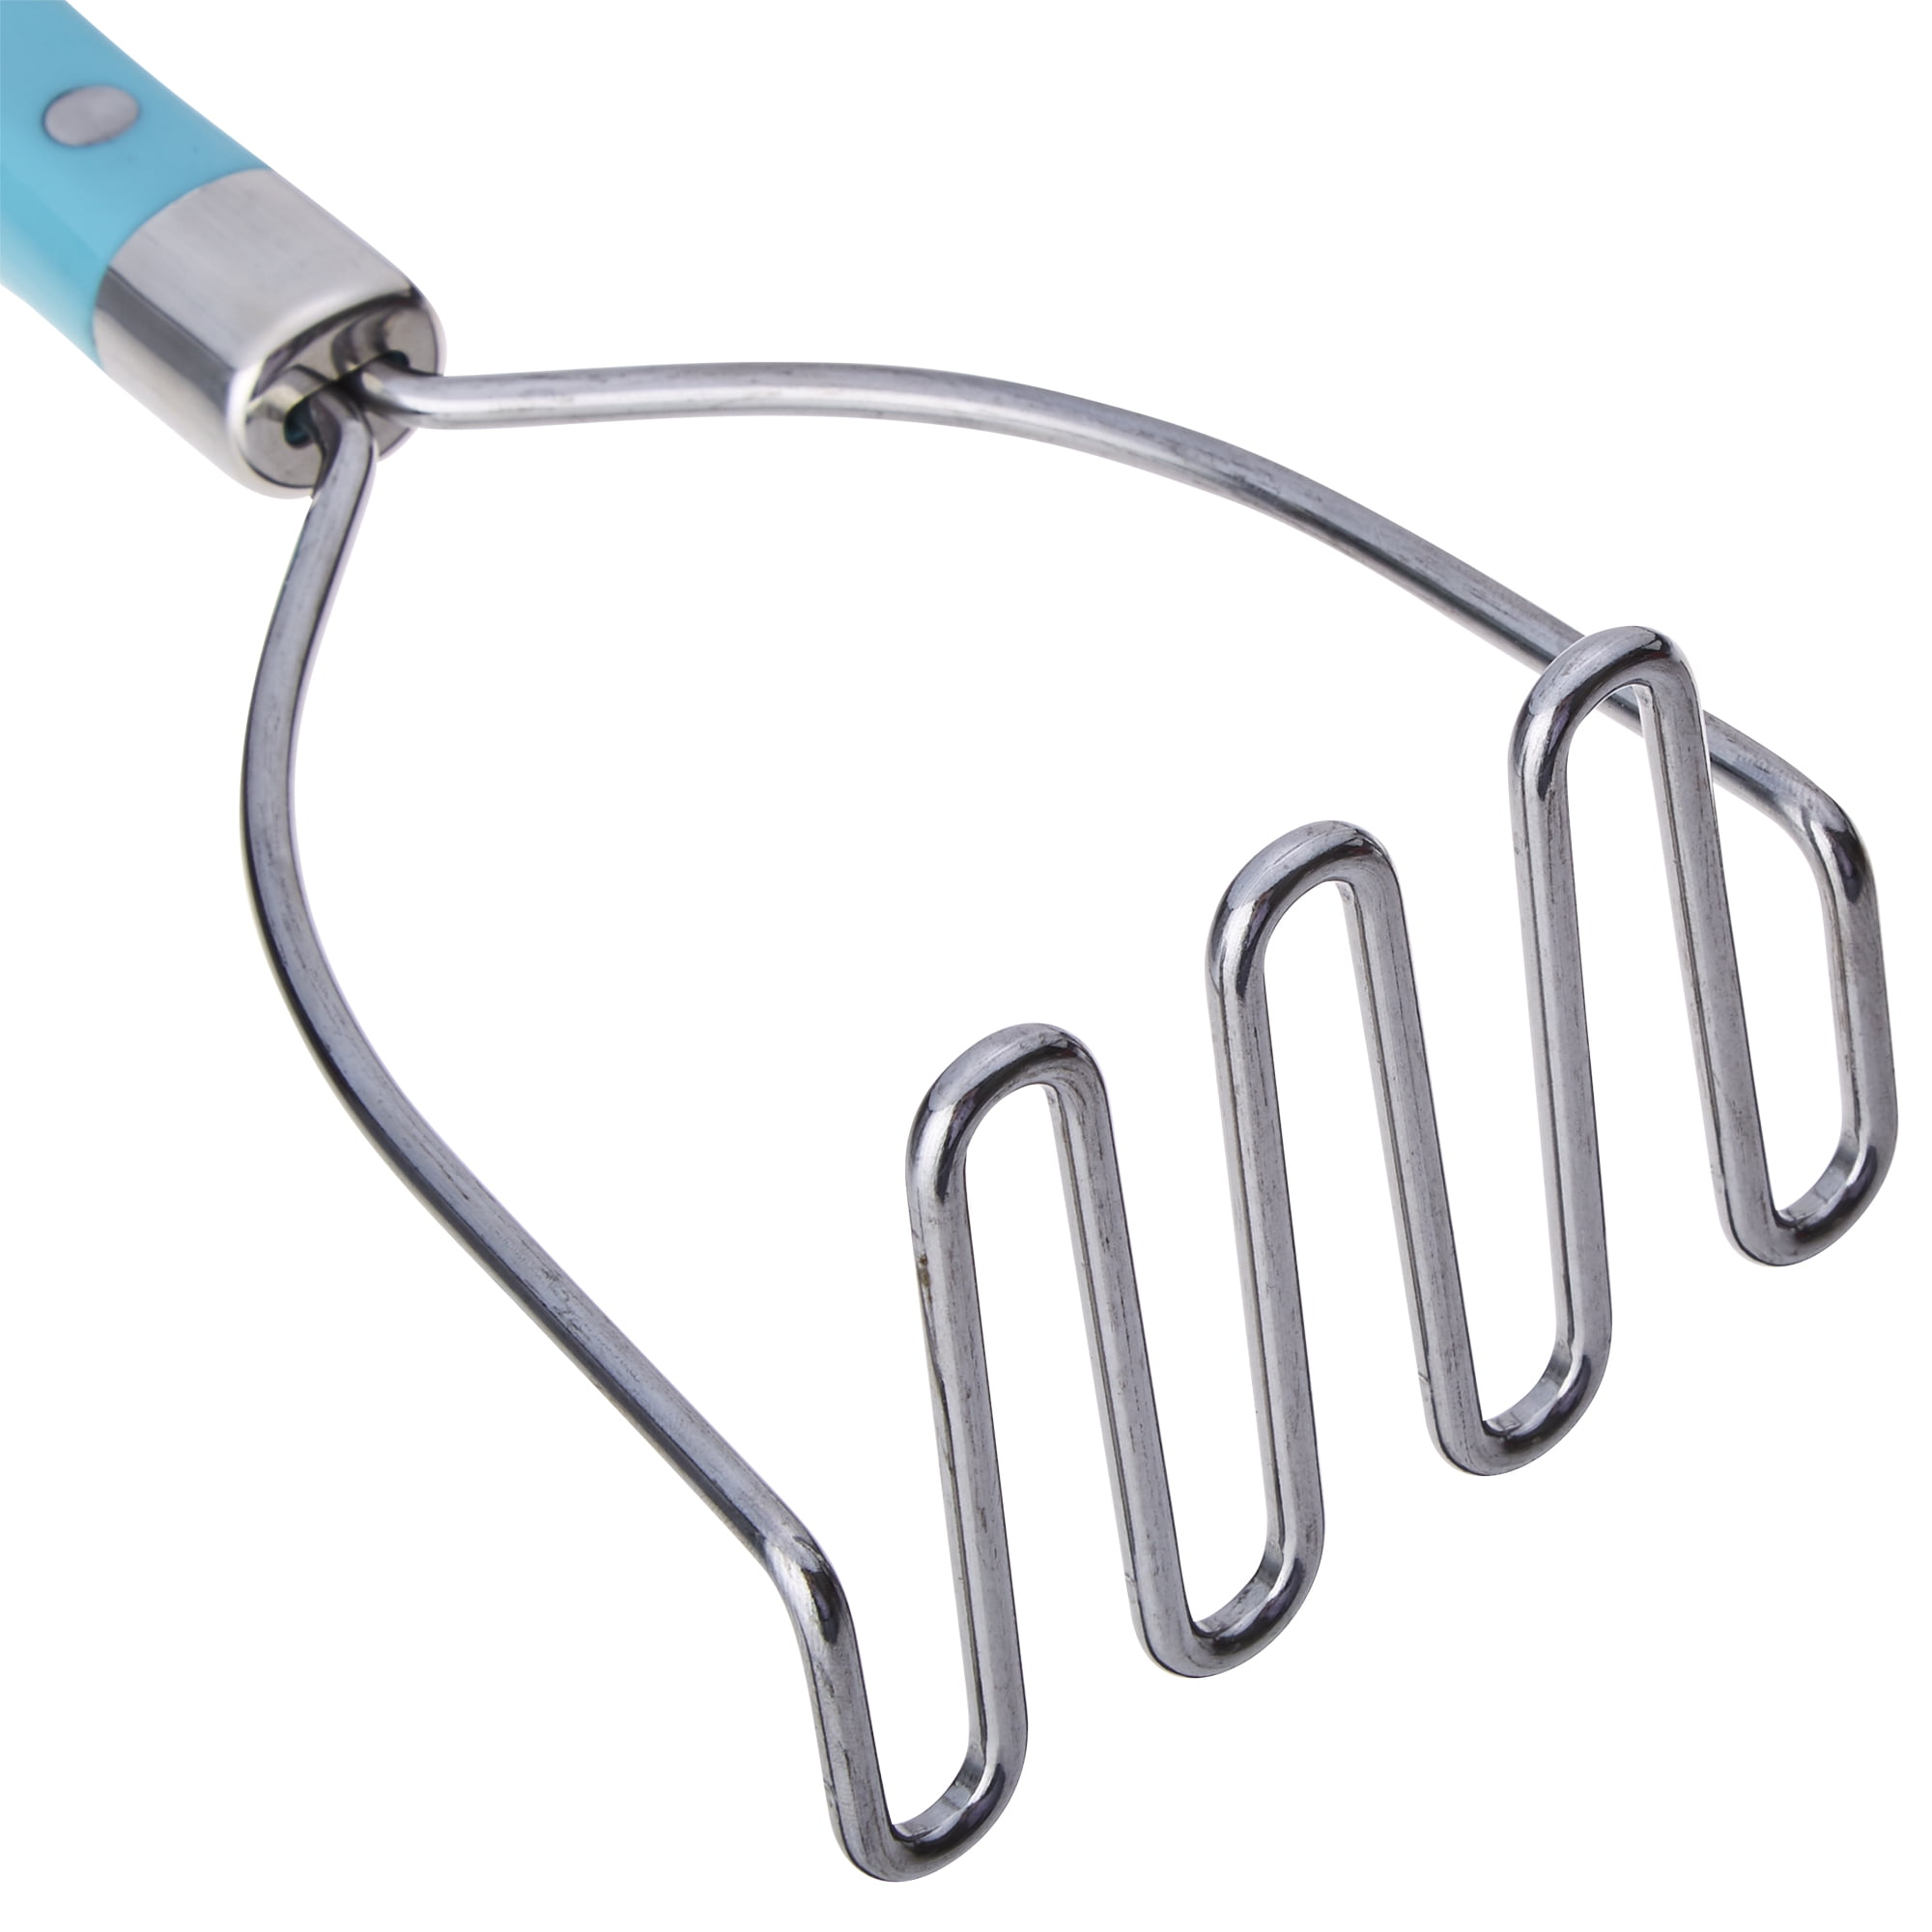 GIR Stainless Steel Potato Masher - Perforated and Wire Masher –